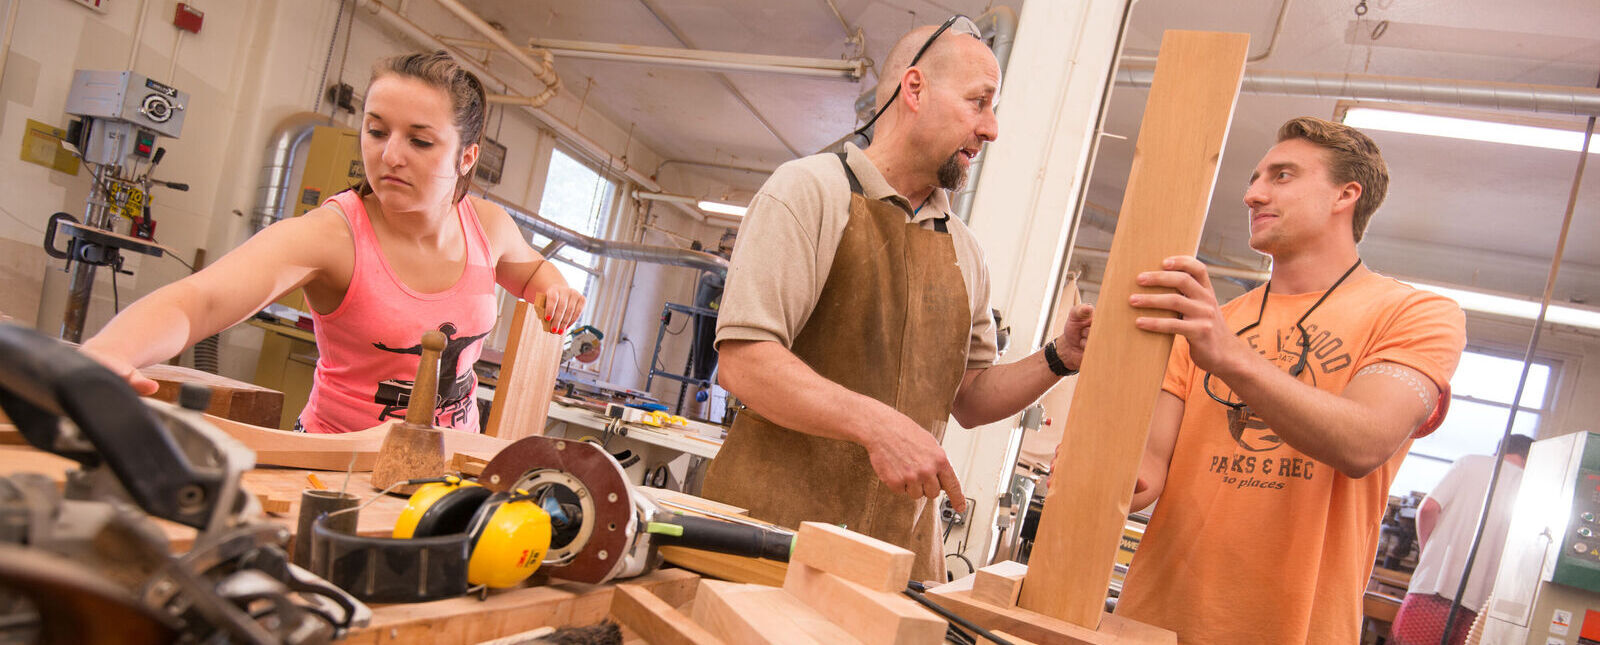 An art faculty member works with students on wood projects